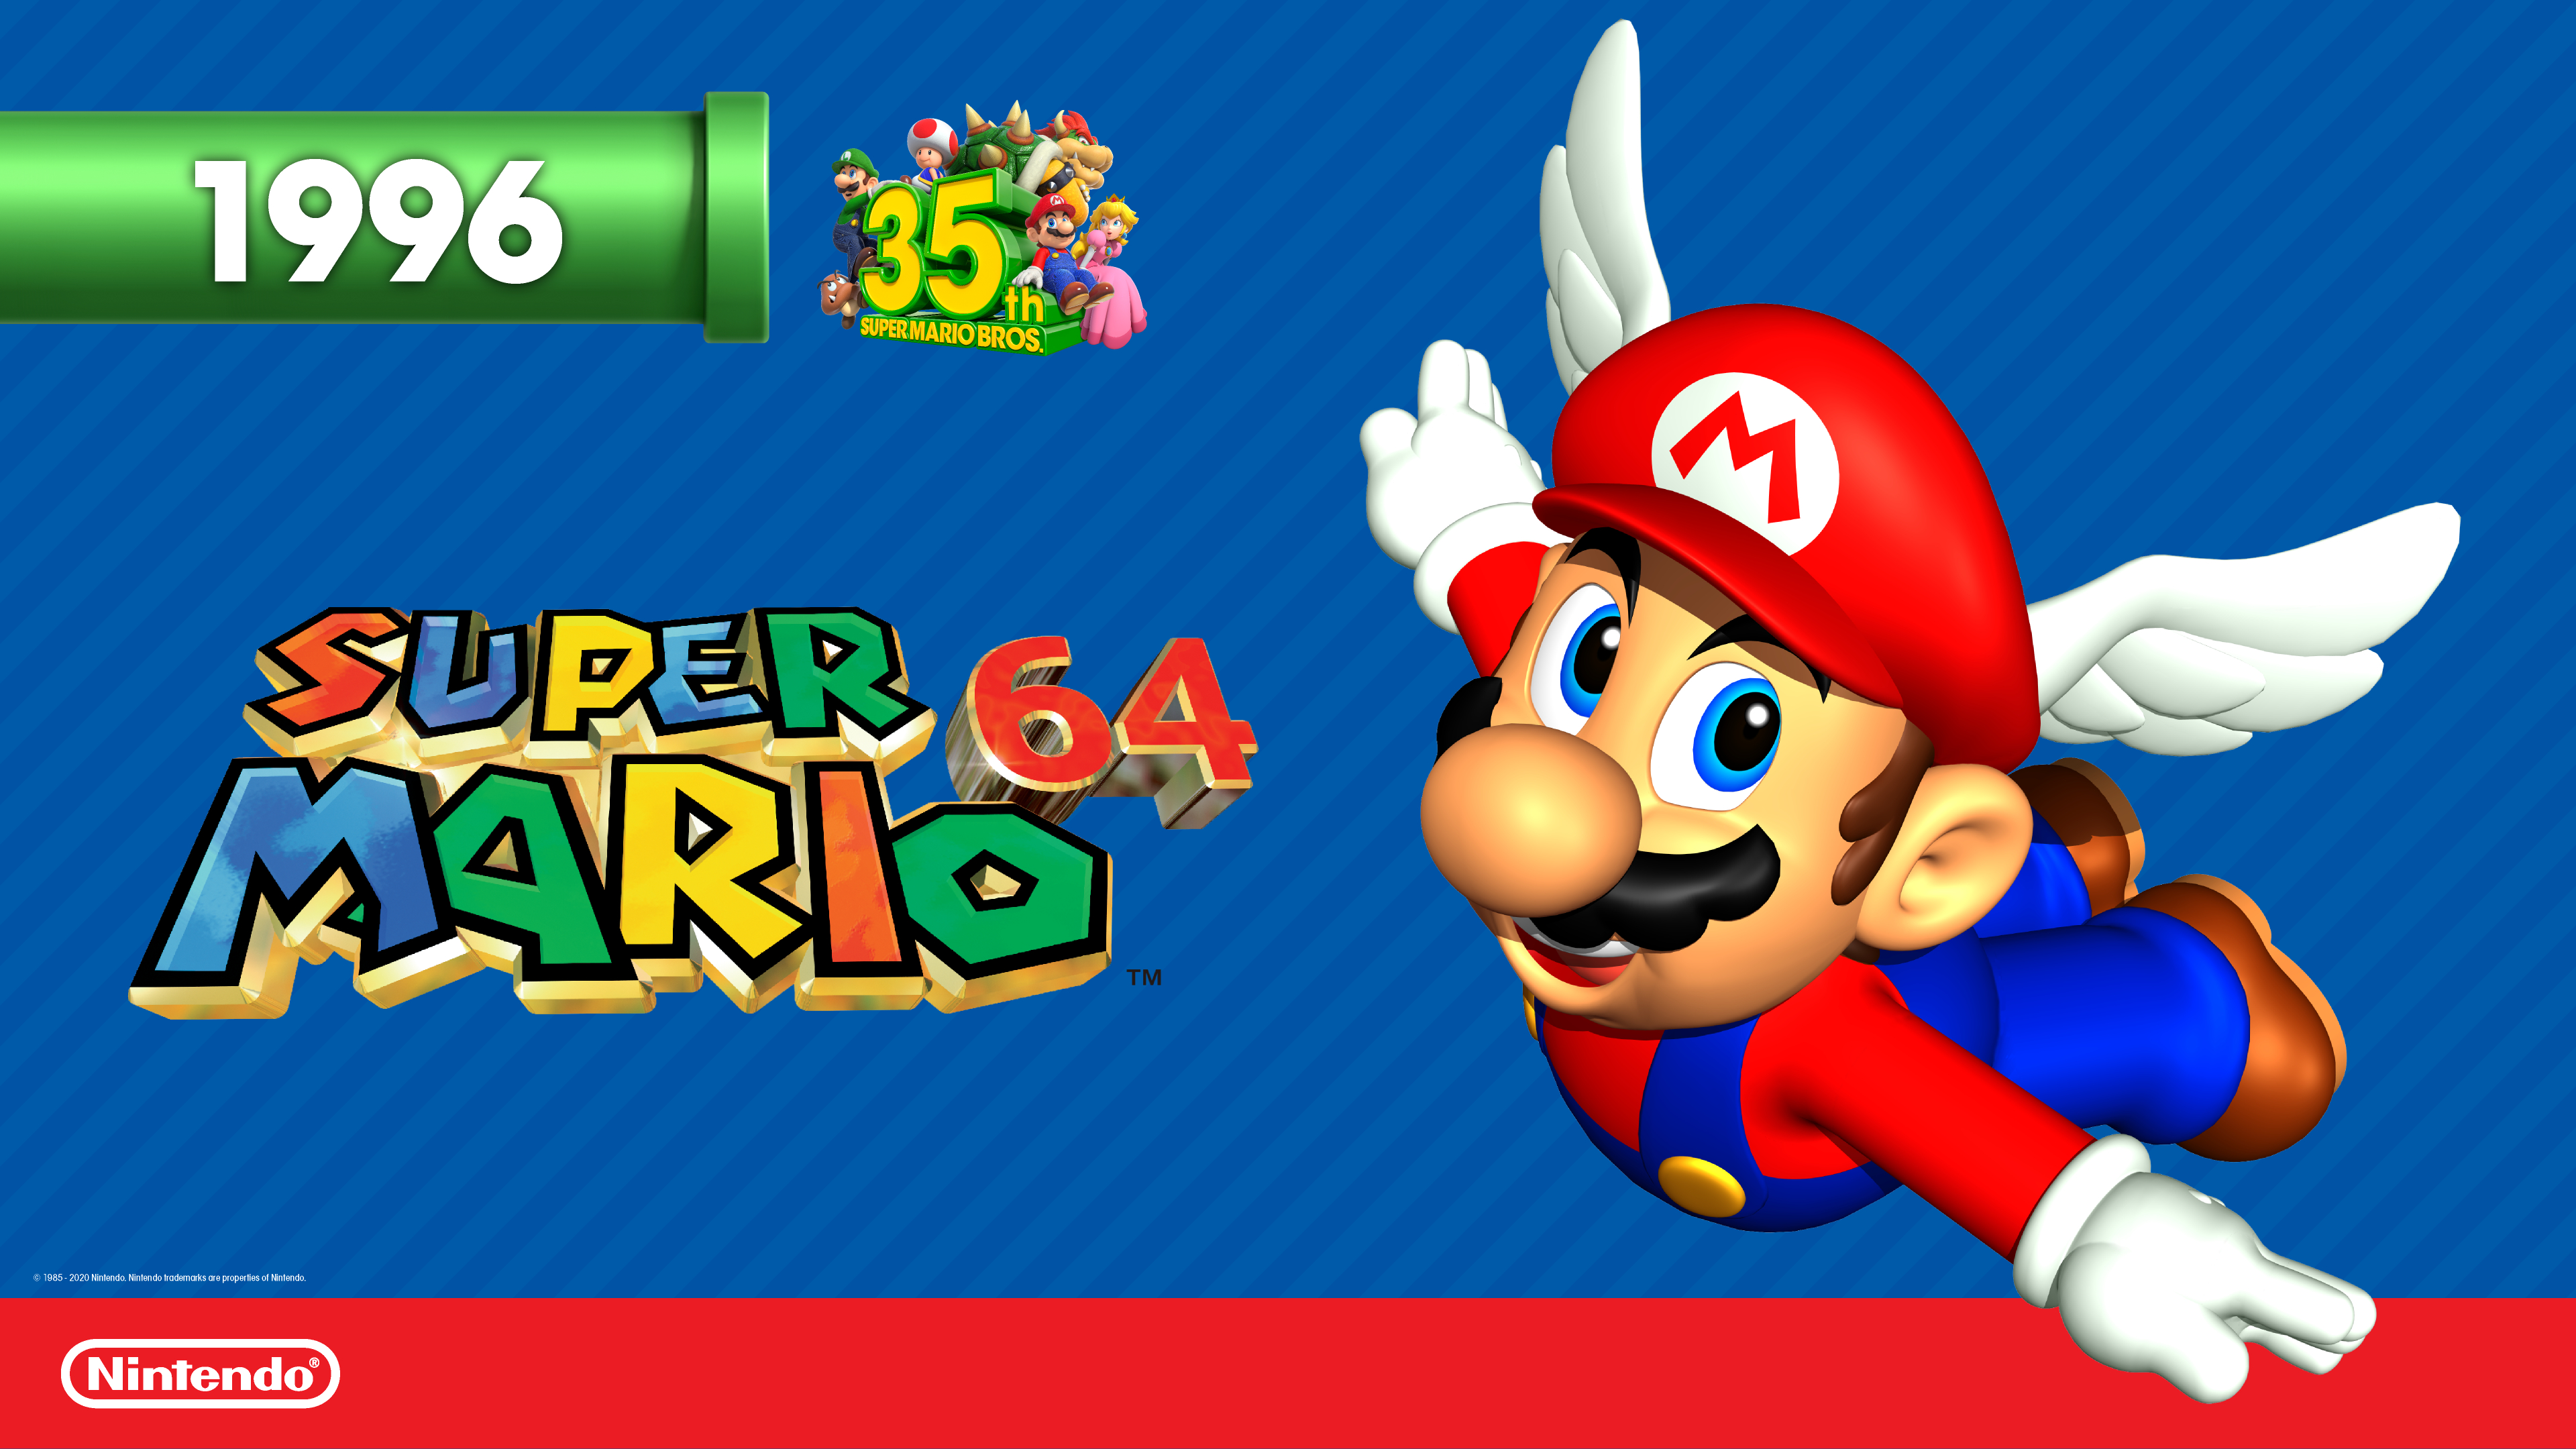 3840x2160 Super Mario 64 HD Wallpapers and Backgrounds